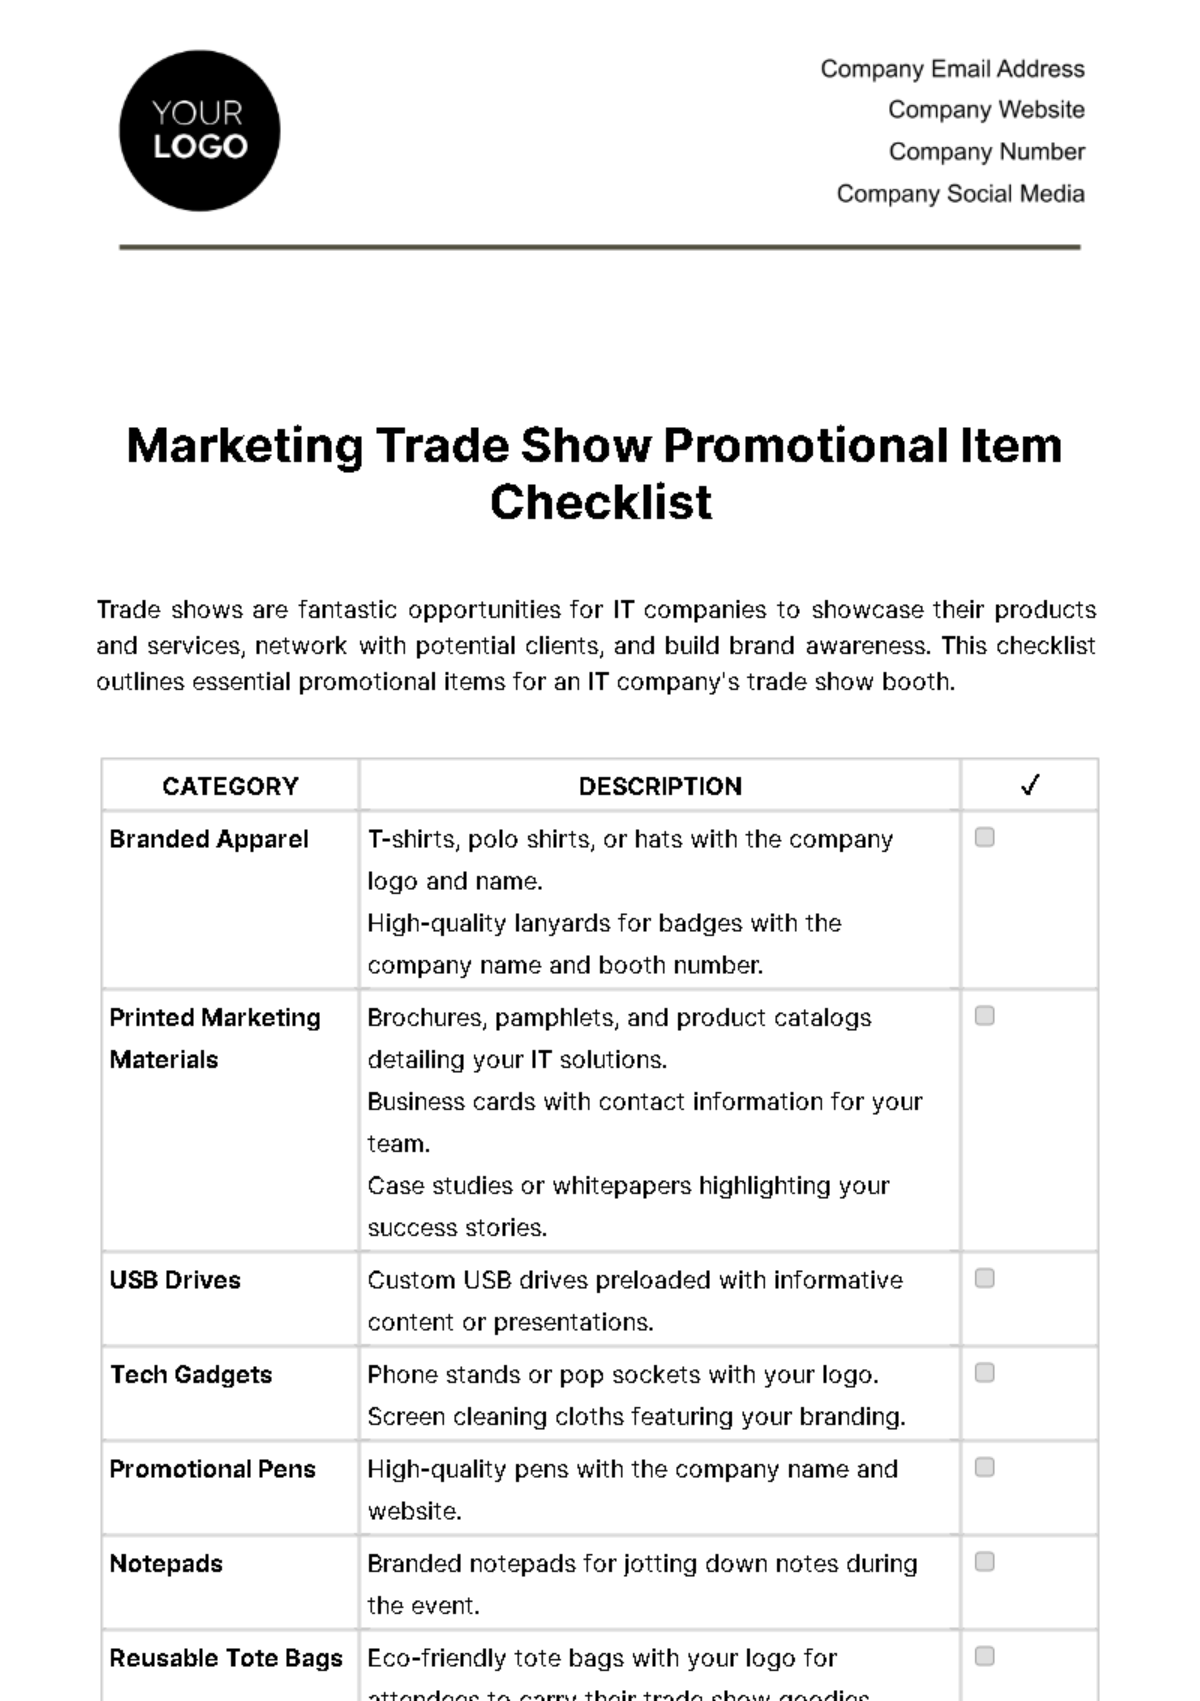 Free Marketing Trade Show Promotional Item Checklist Template